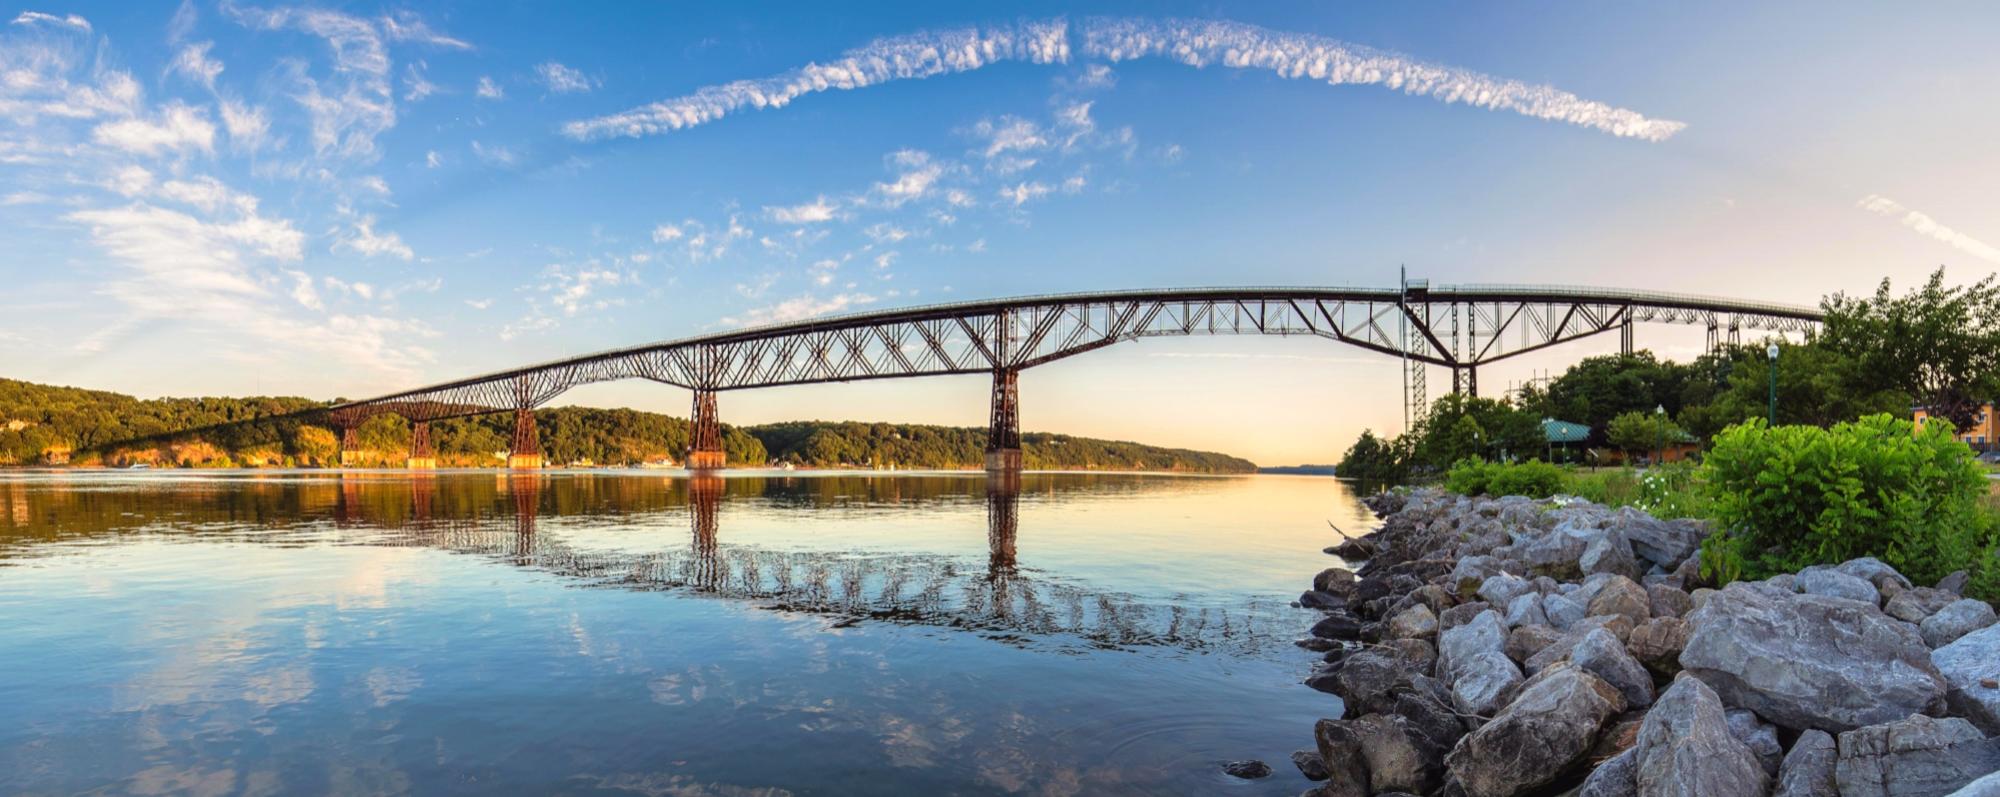 Walkway Over The Hudson - Photo Courtesy of Beautiful Destinations